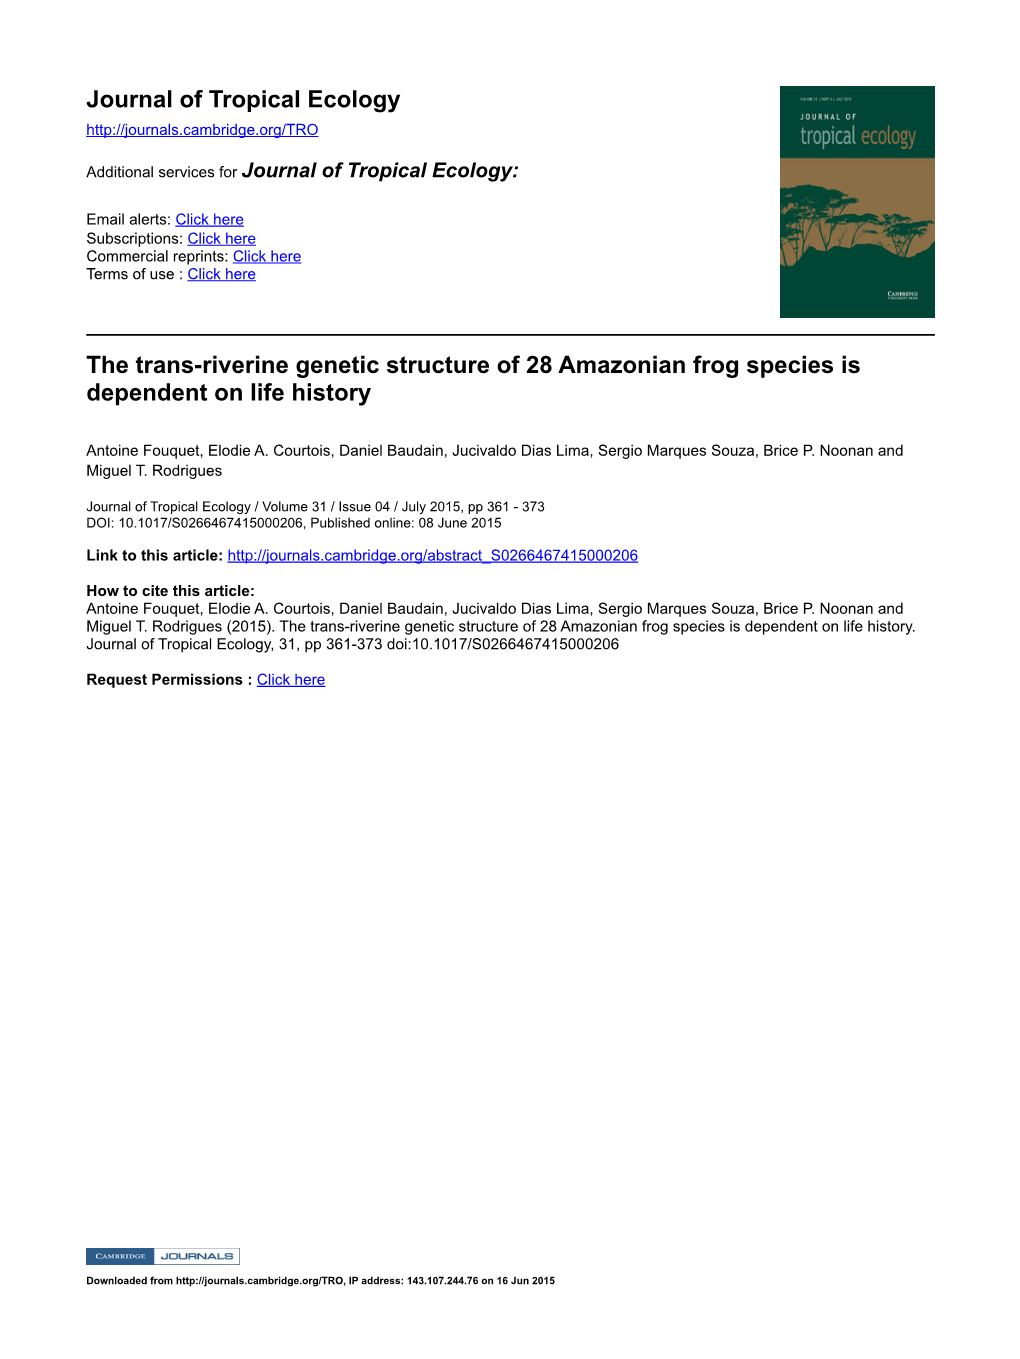 Journal of Tropical Ecology the Trans-Riverine Genetic Structure of 28